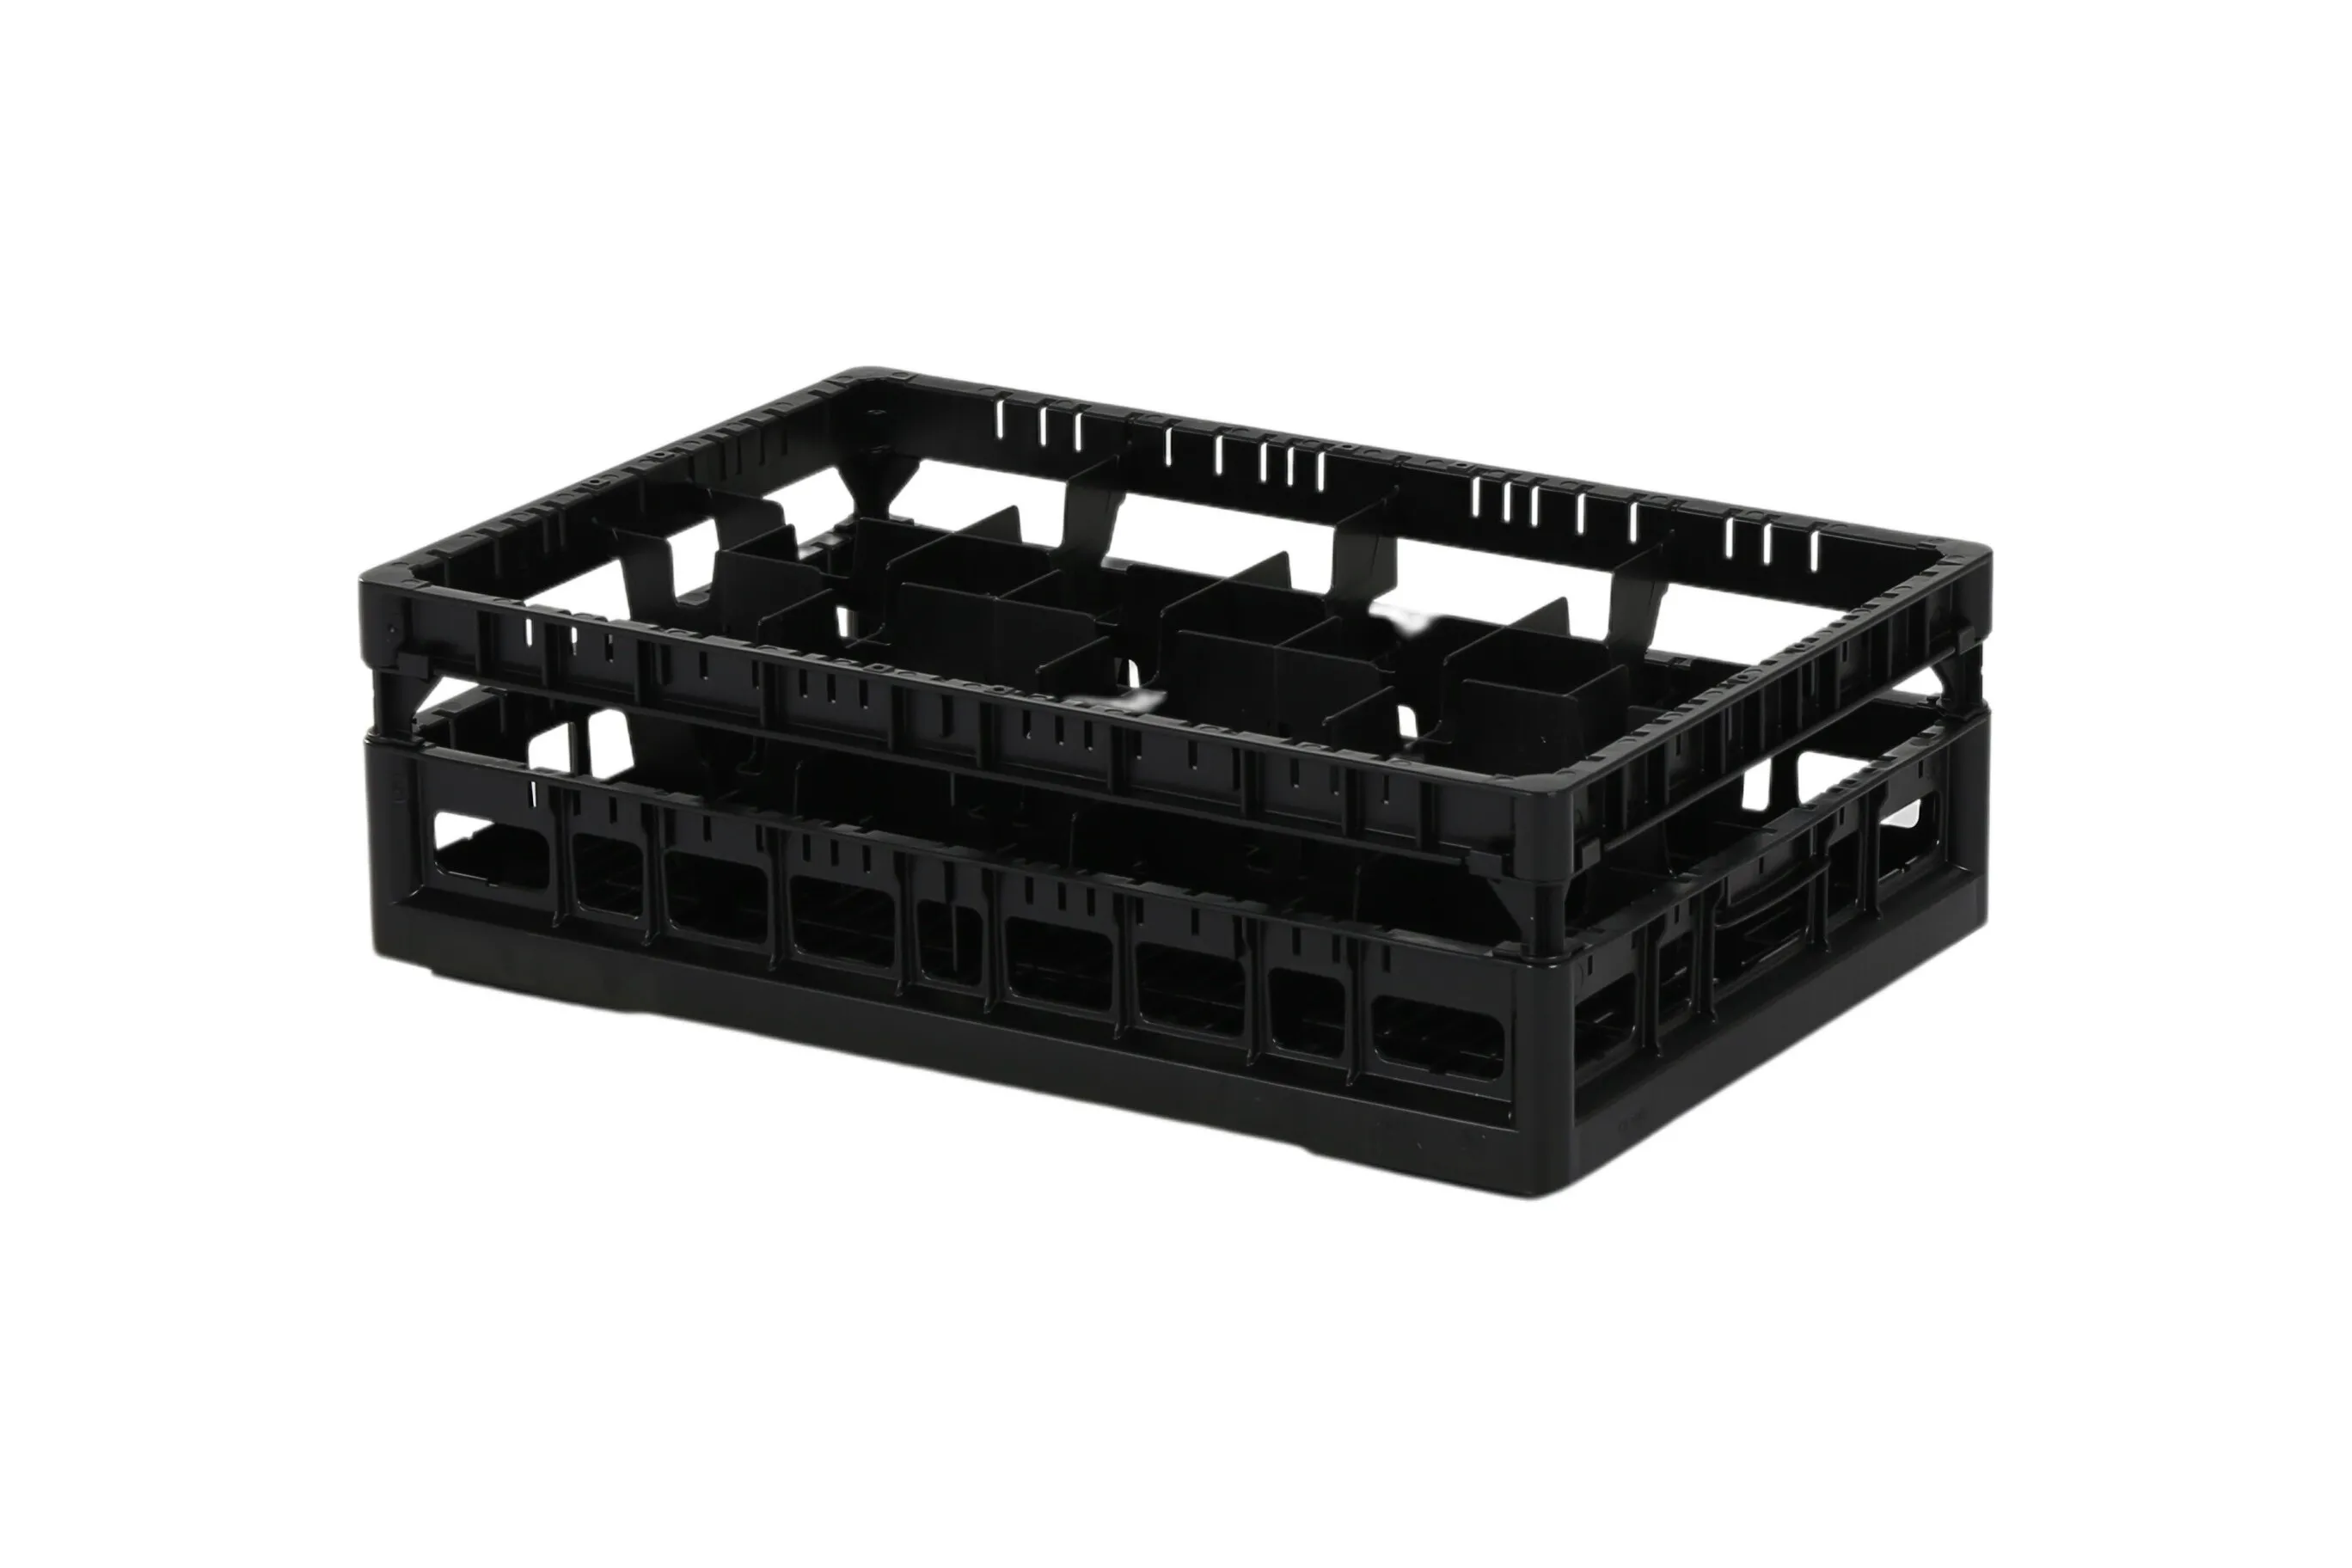 Clixrack Plate basket 600 x 400 mm black - Plate height max. 28mm - with 3 x 12 compartment division - maximum Ø plate 125 mm 